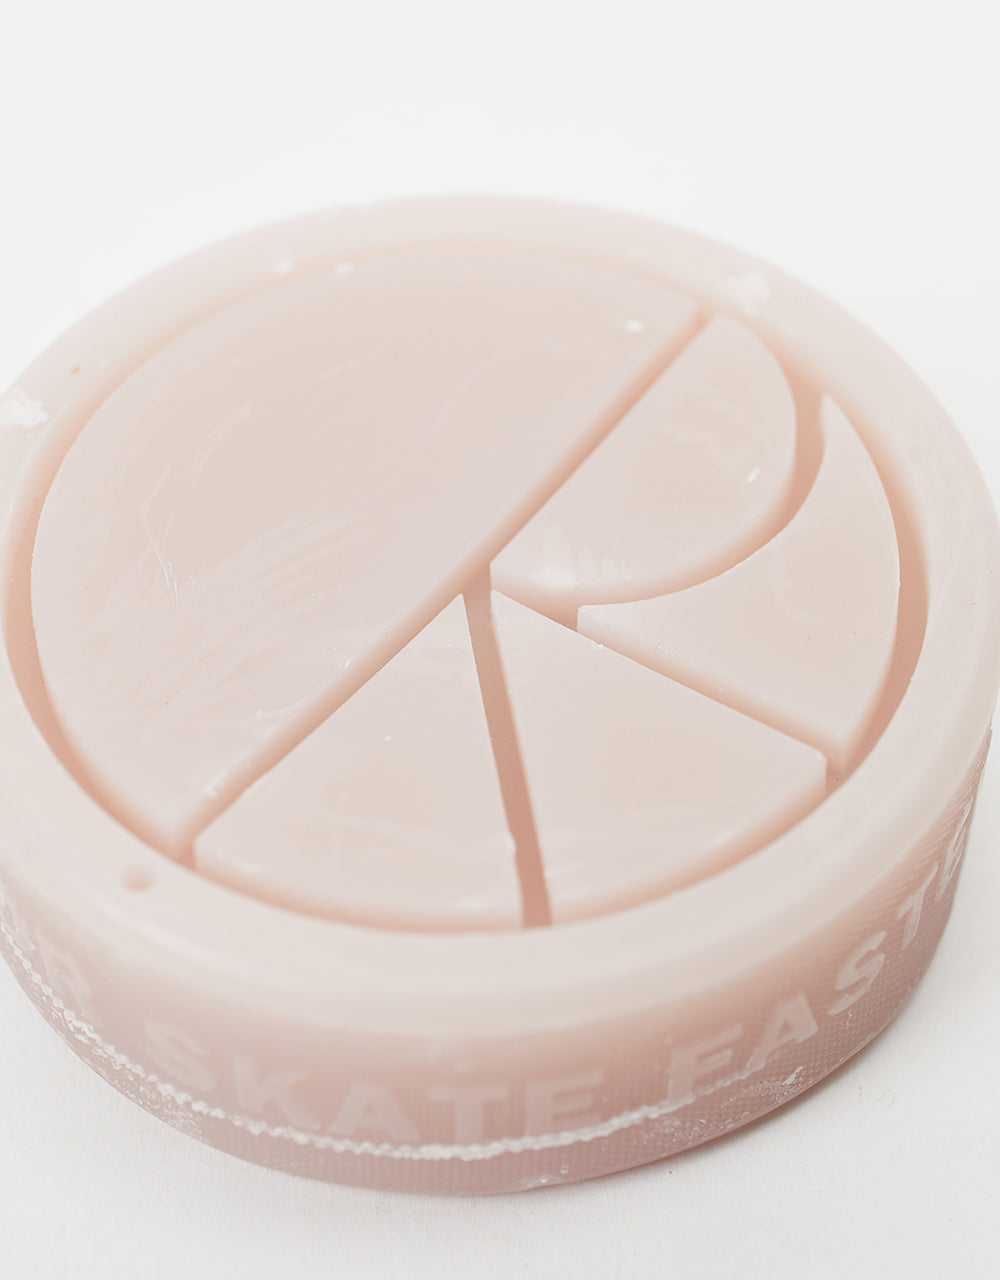 Polar Use Wisely or Skate Faster Wax - Soft Pink